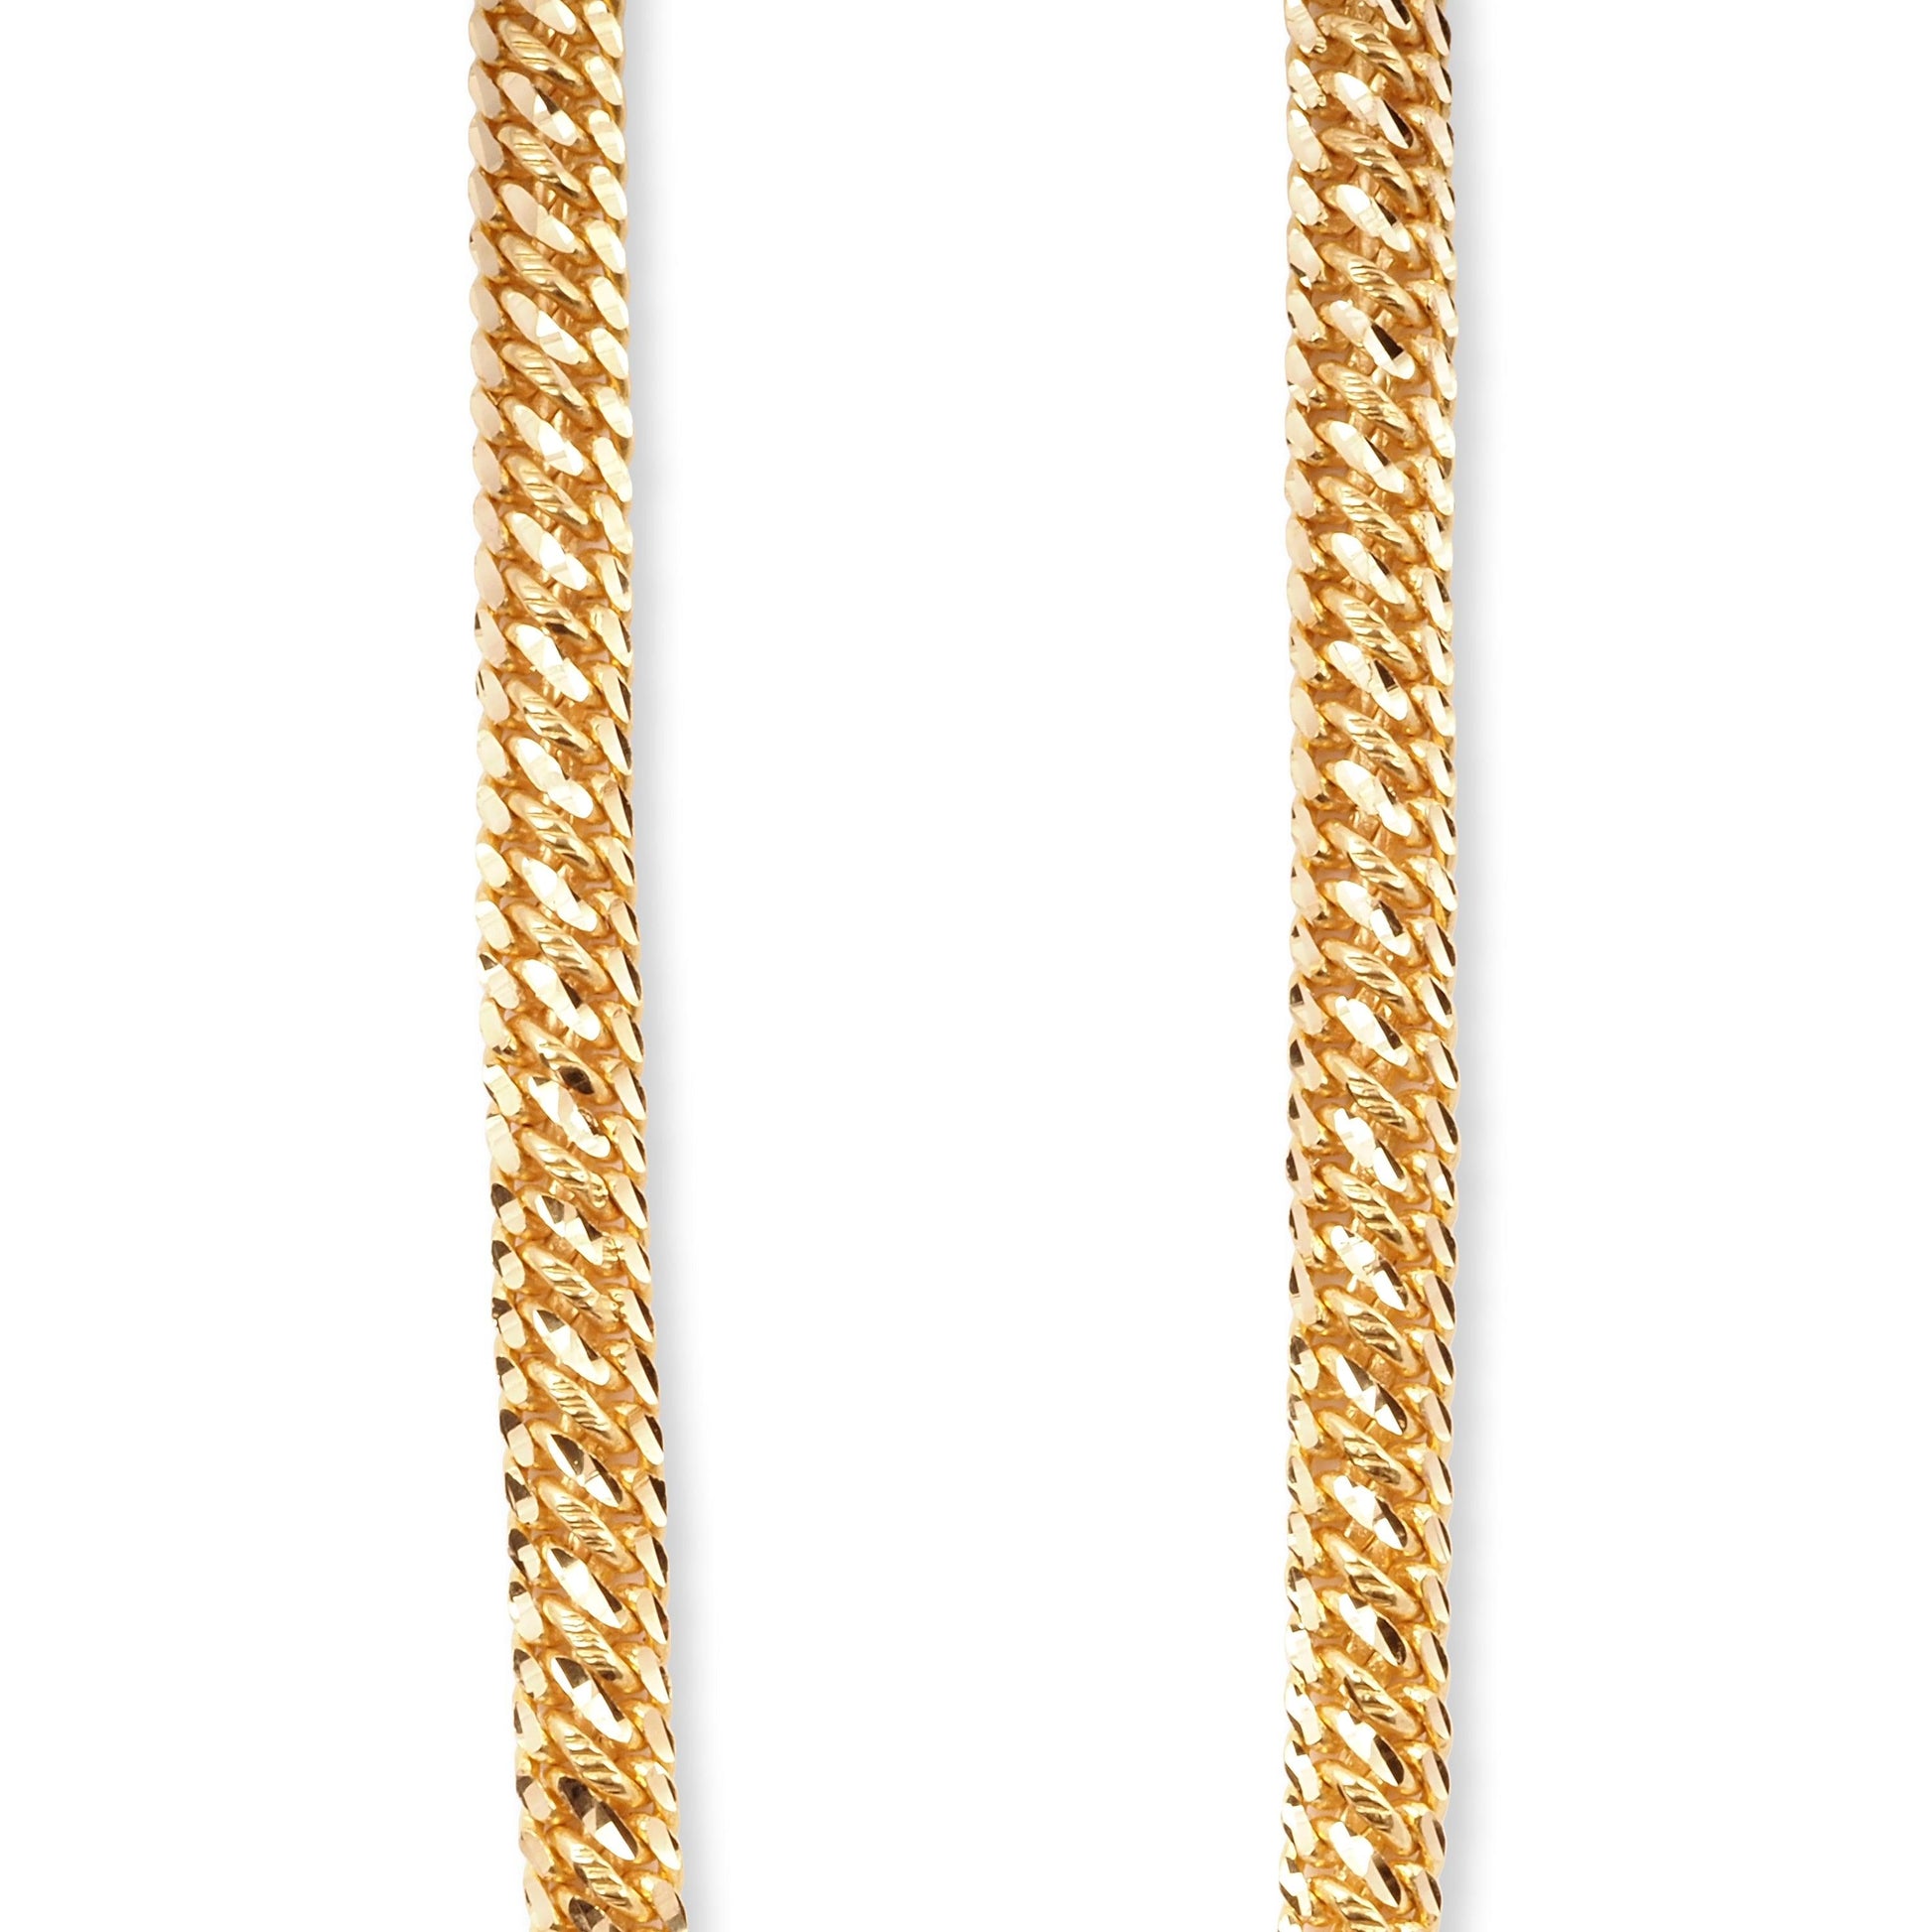 22ct Yellow Gold Intertwine Gents Chain with S Clasp C-3817 - Minar Jewellers